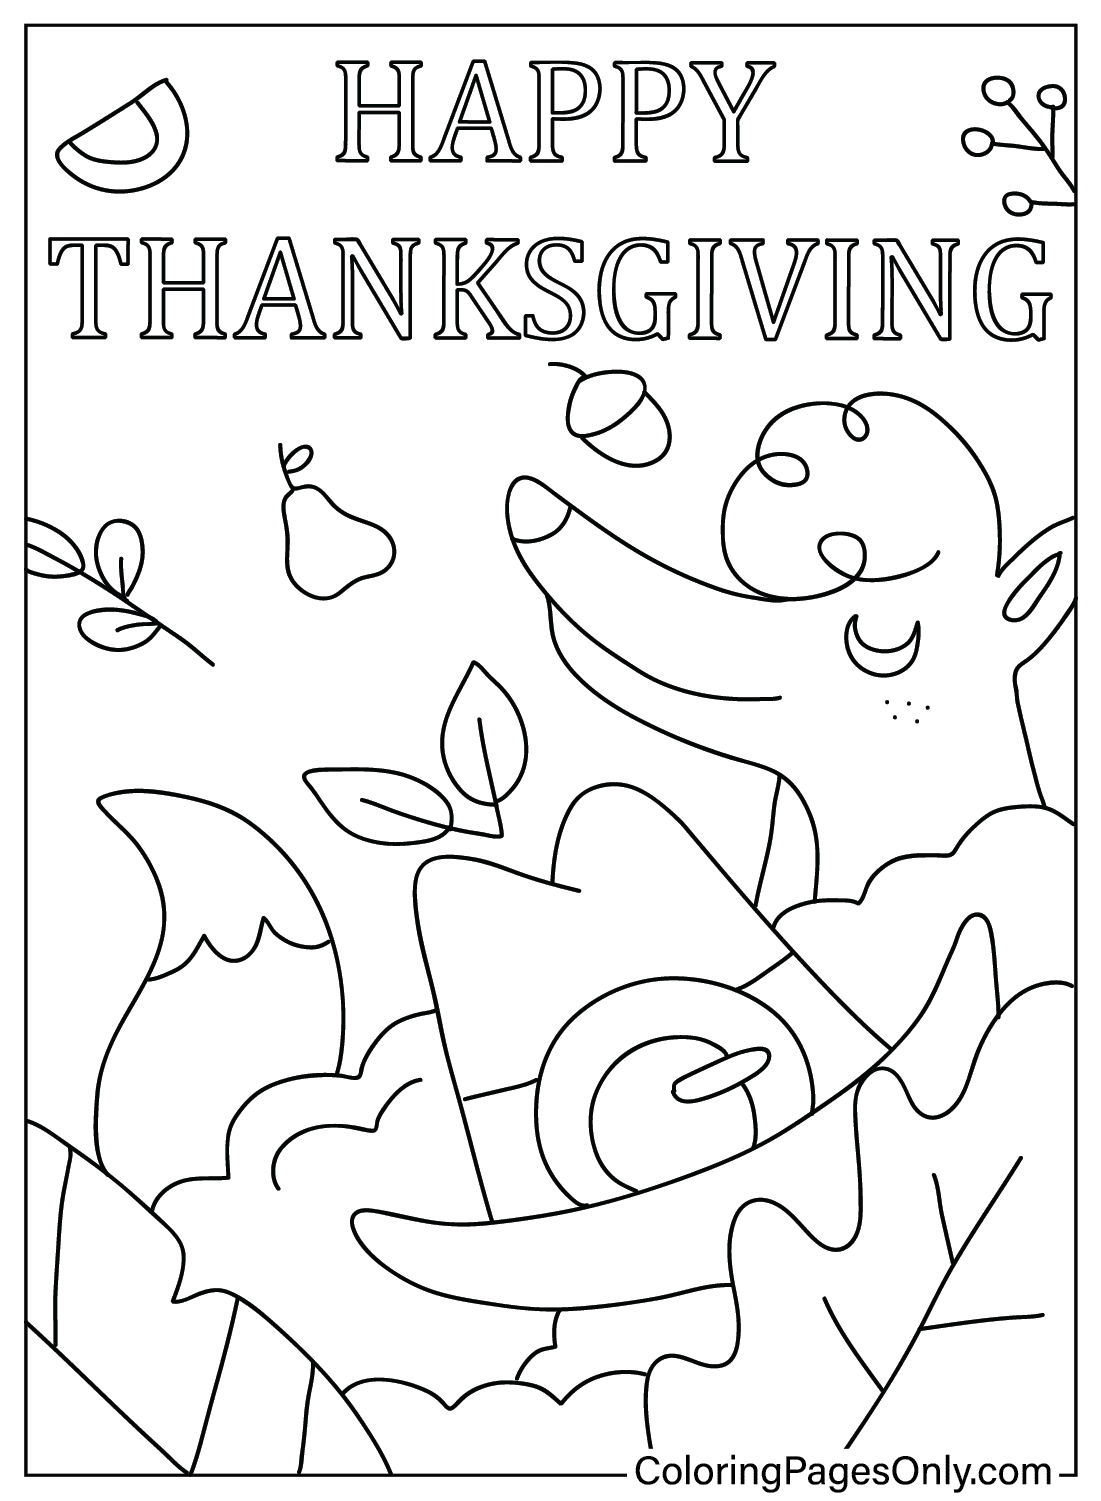 Adult Coloring Pages Thanksgiving